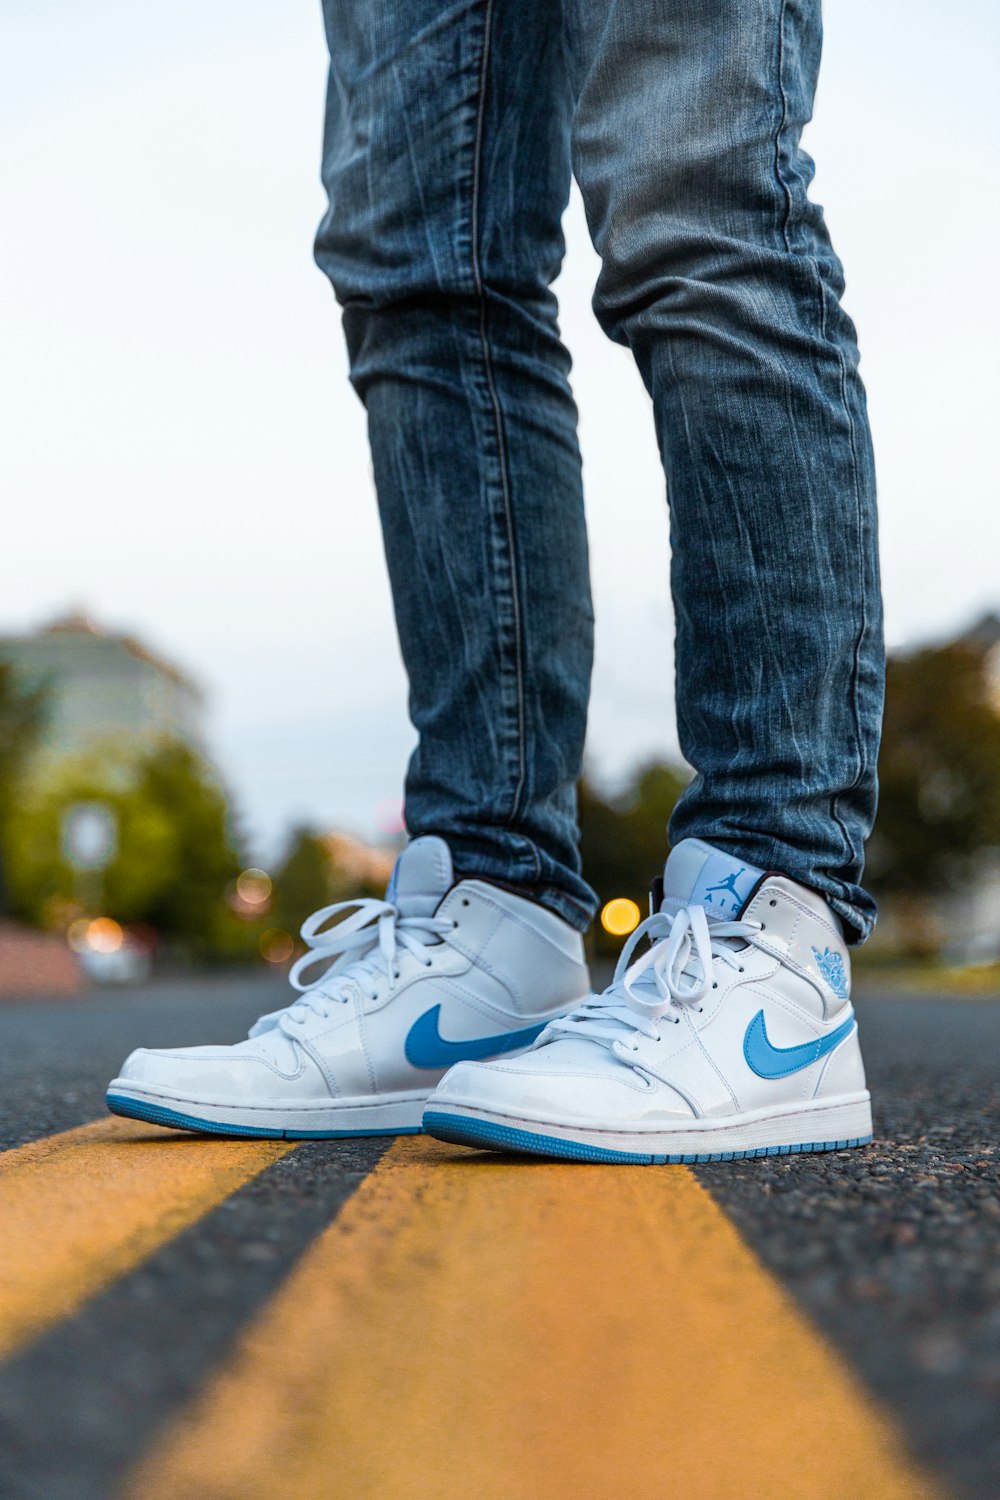 selective focus photography of person wearing blue-and-white Nike Air Jordan  1's photo – Free Shoe Image on Unsplash